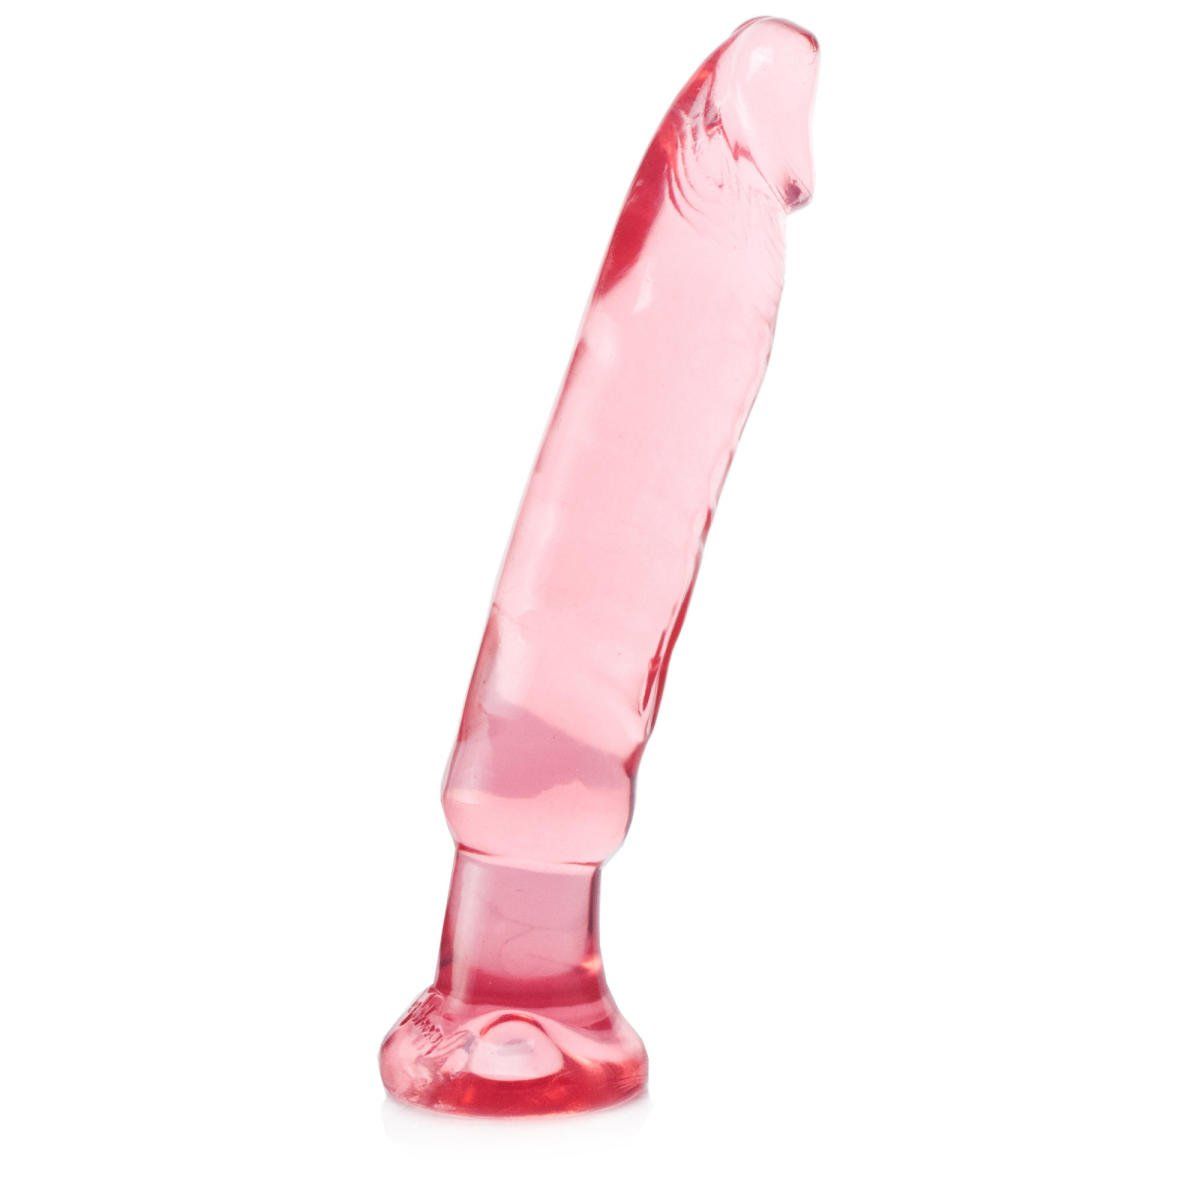 best of To order dildos Made